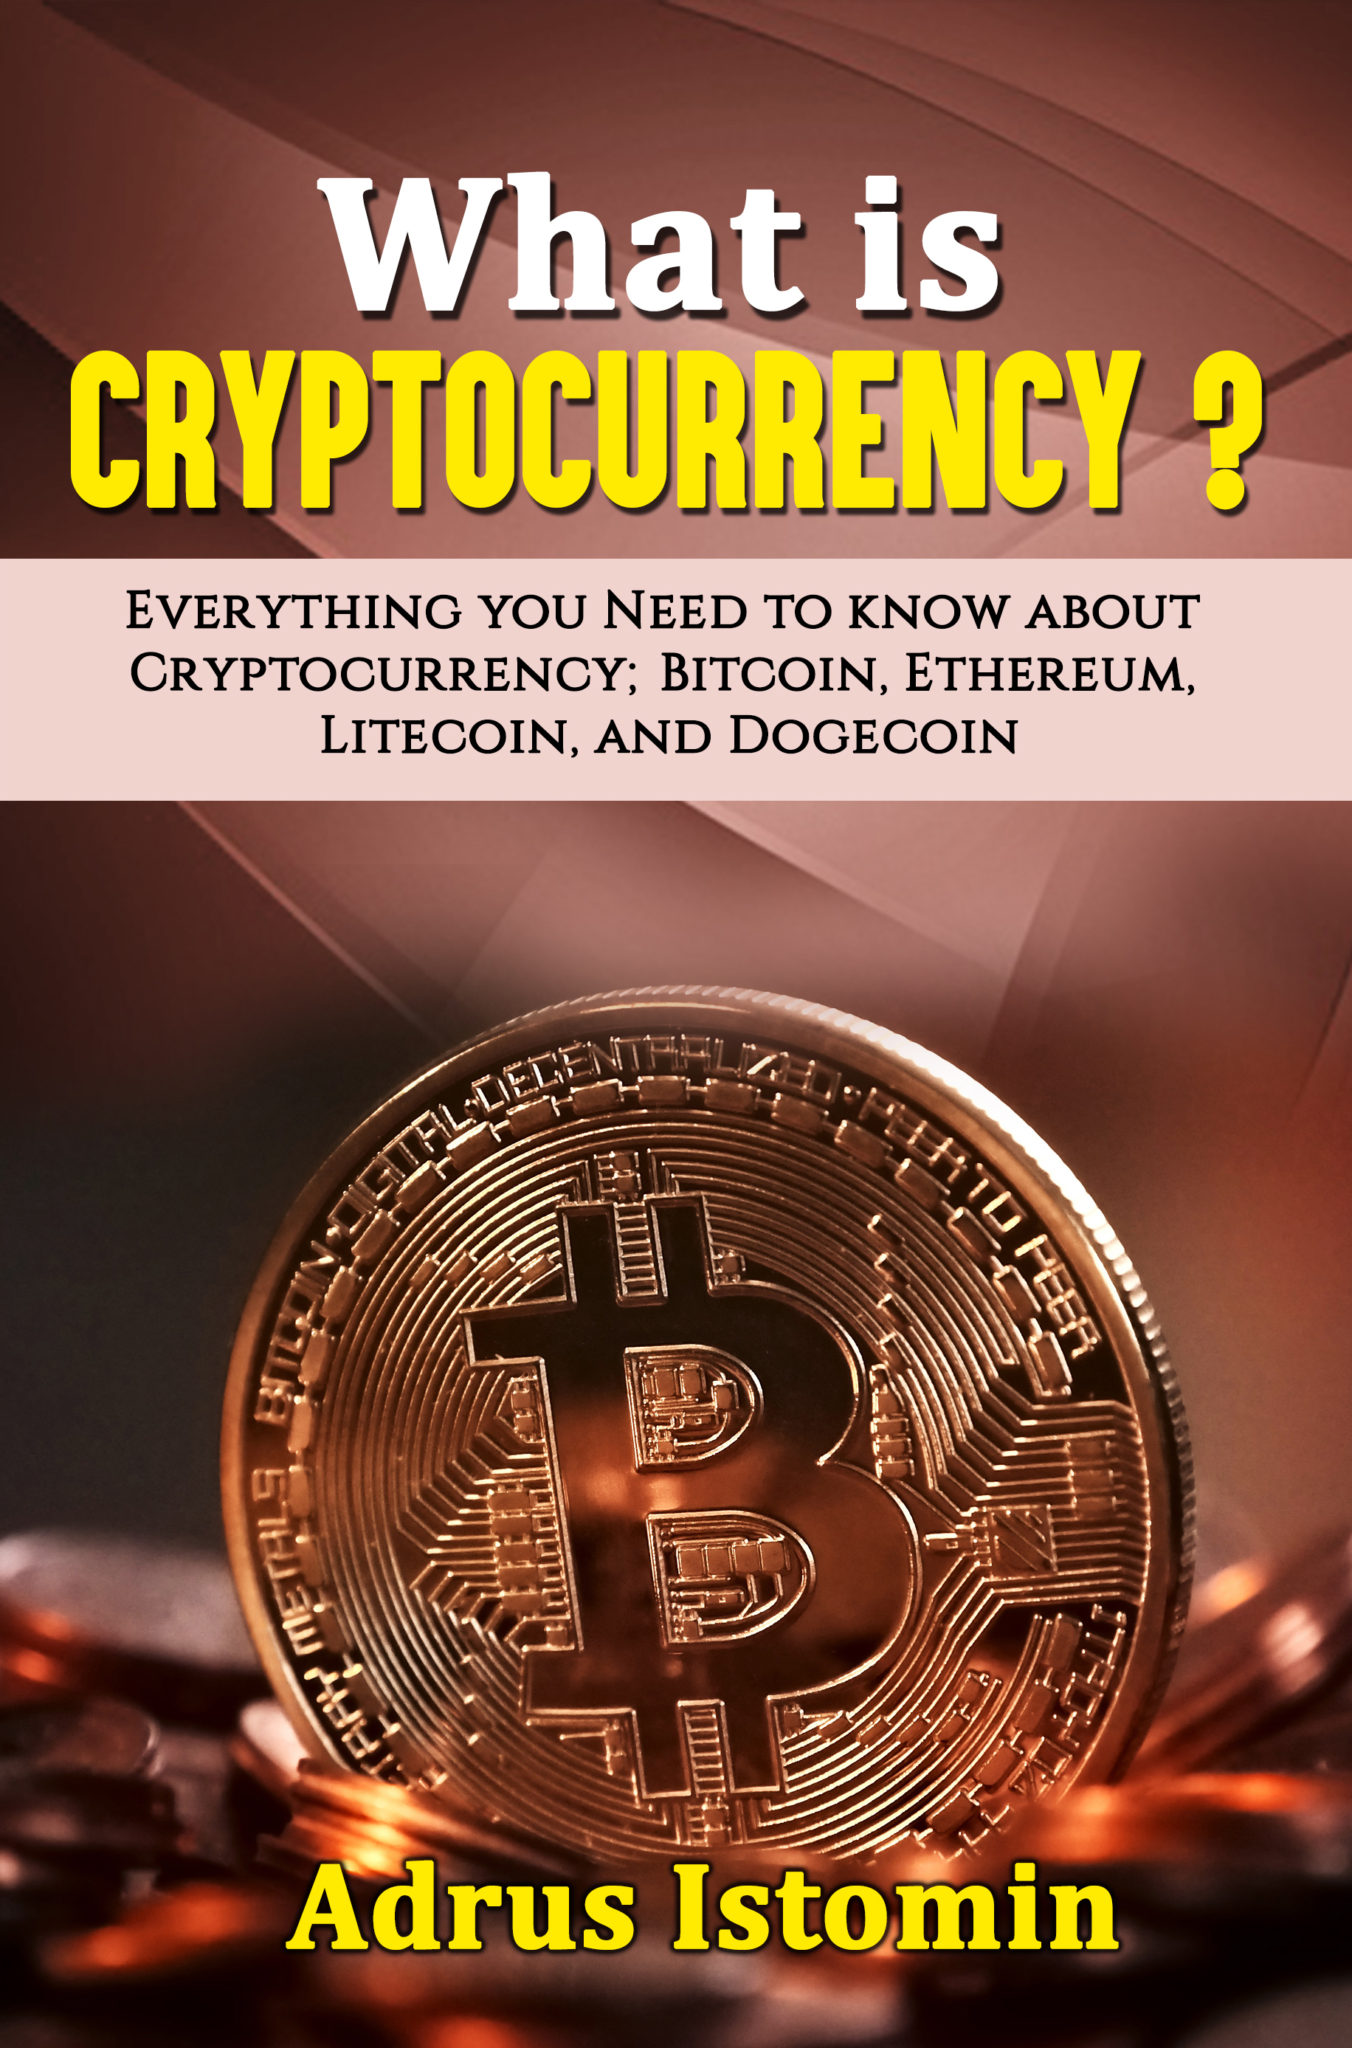 FREE: What is Cryptocurrency? Everything You Need to Know about Cryptocurrency; Bitcoin, Ethereum, Litecoin, and Dogecoin by Andrus Istomin